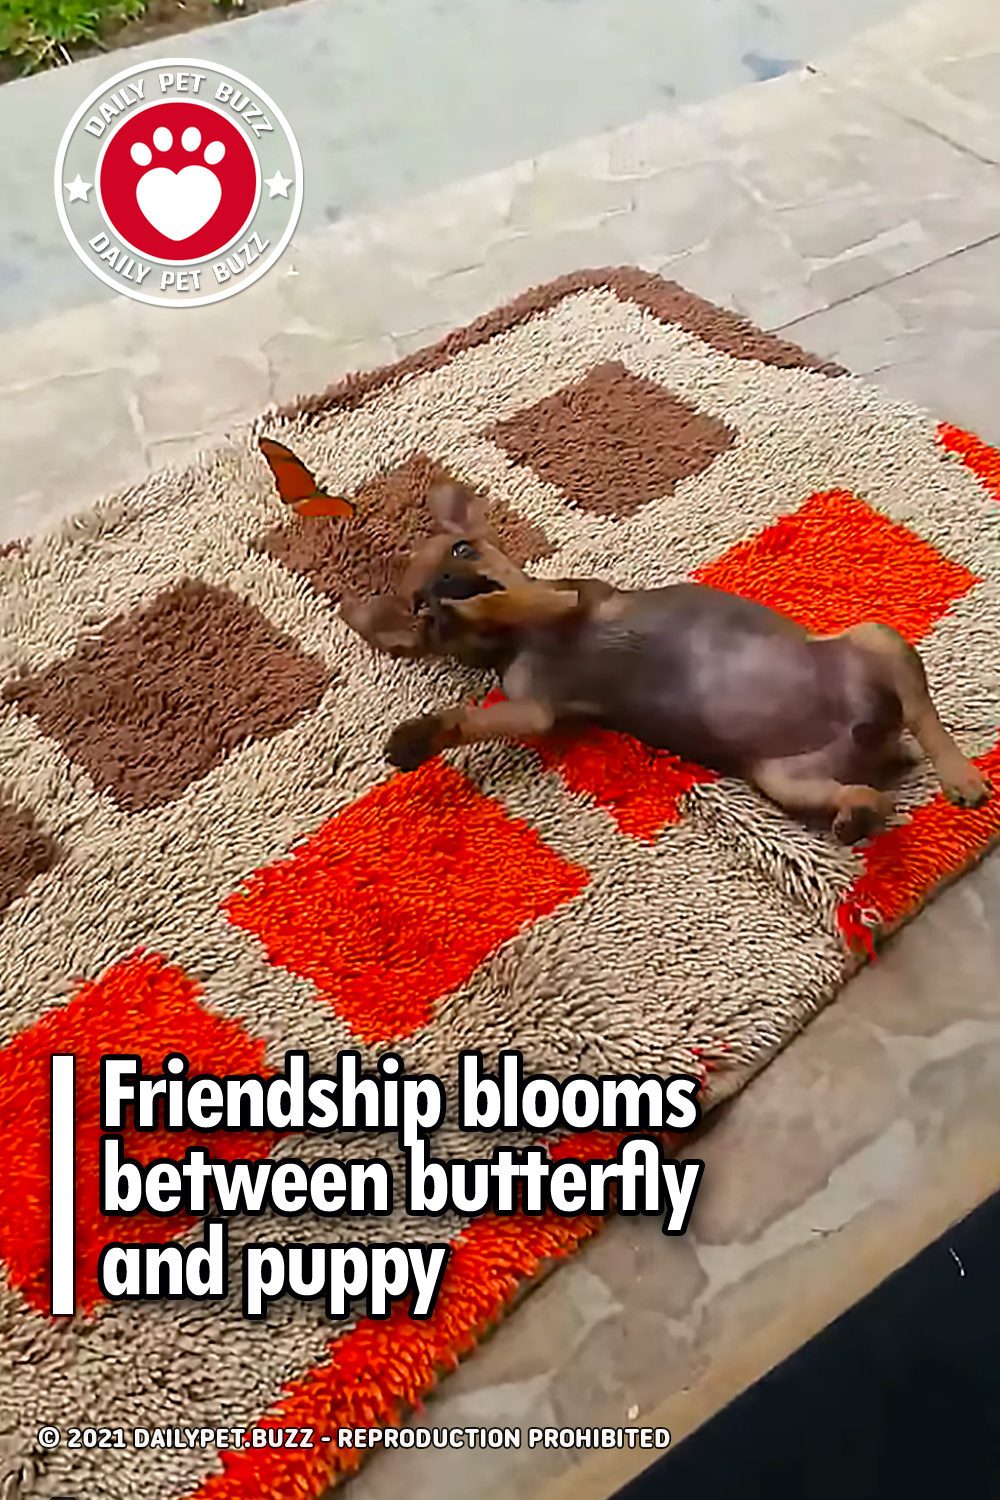 Friendship blooms between butterfly and puppy